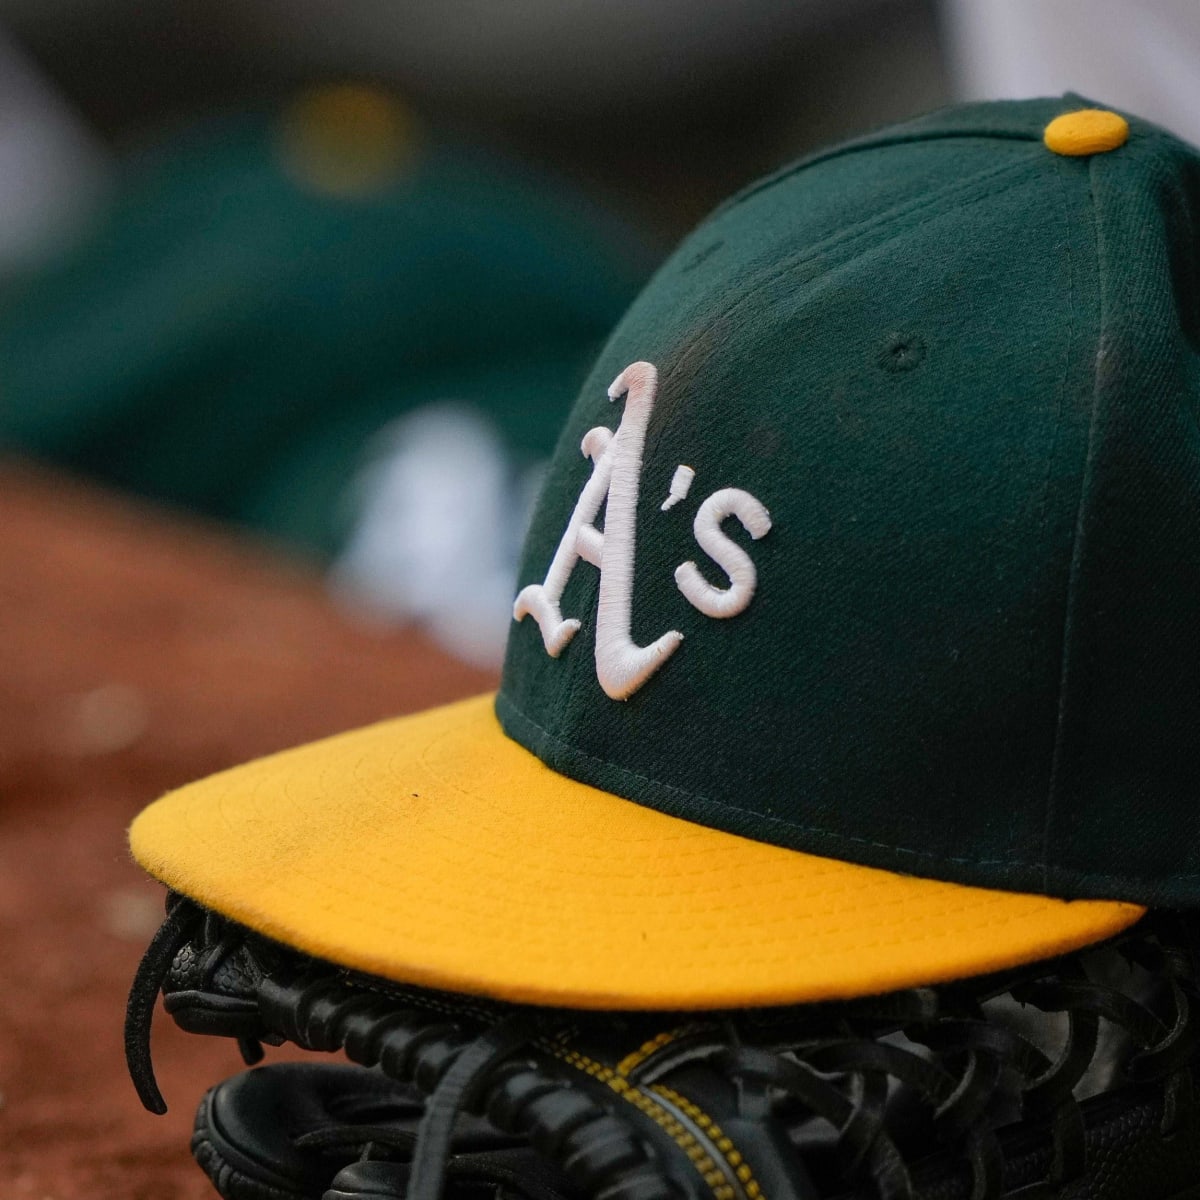 Ahern would welcome A's to Las Vegas Strip